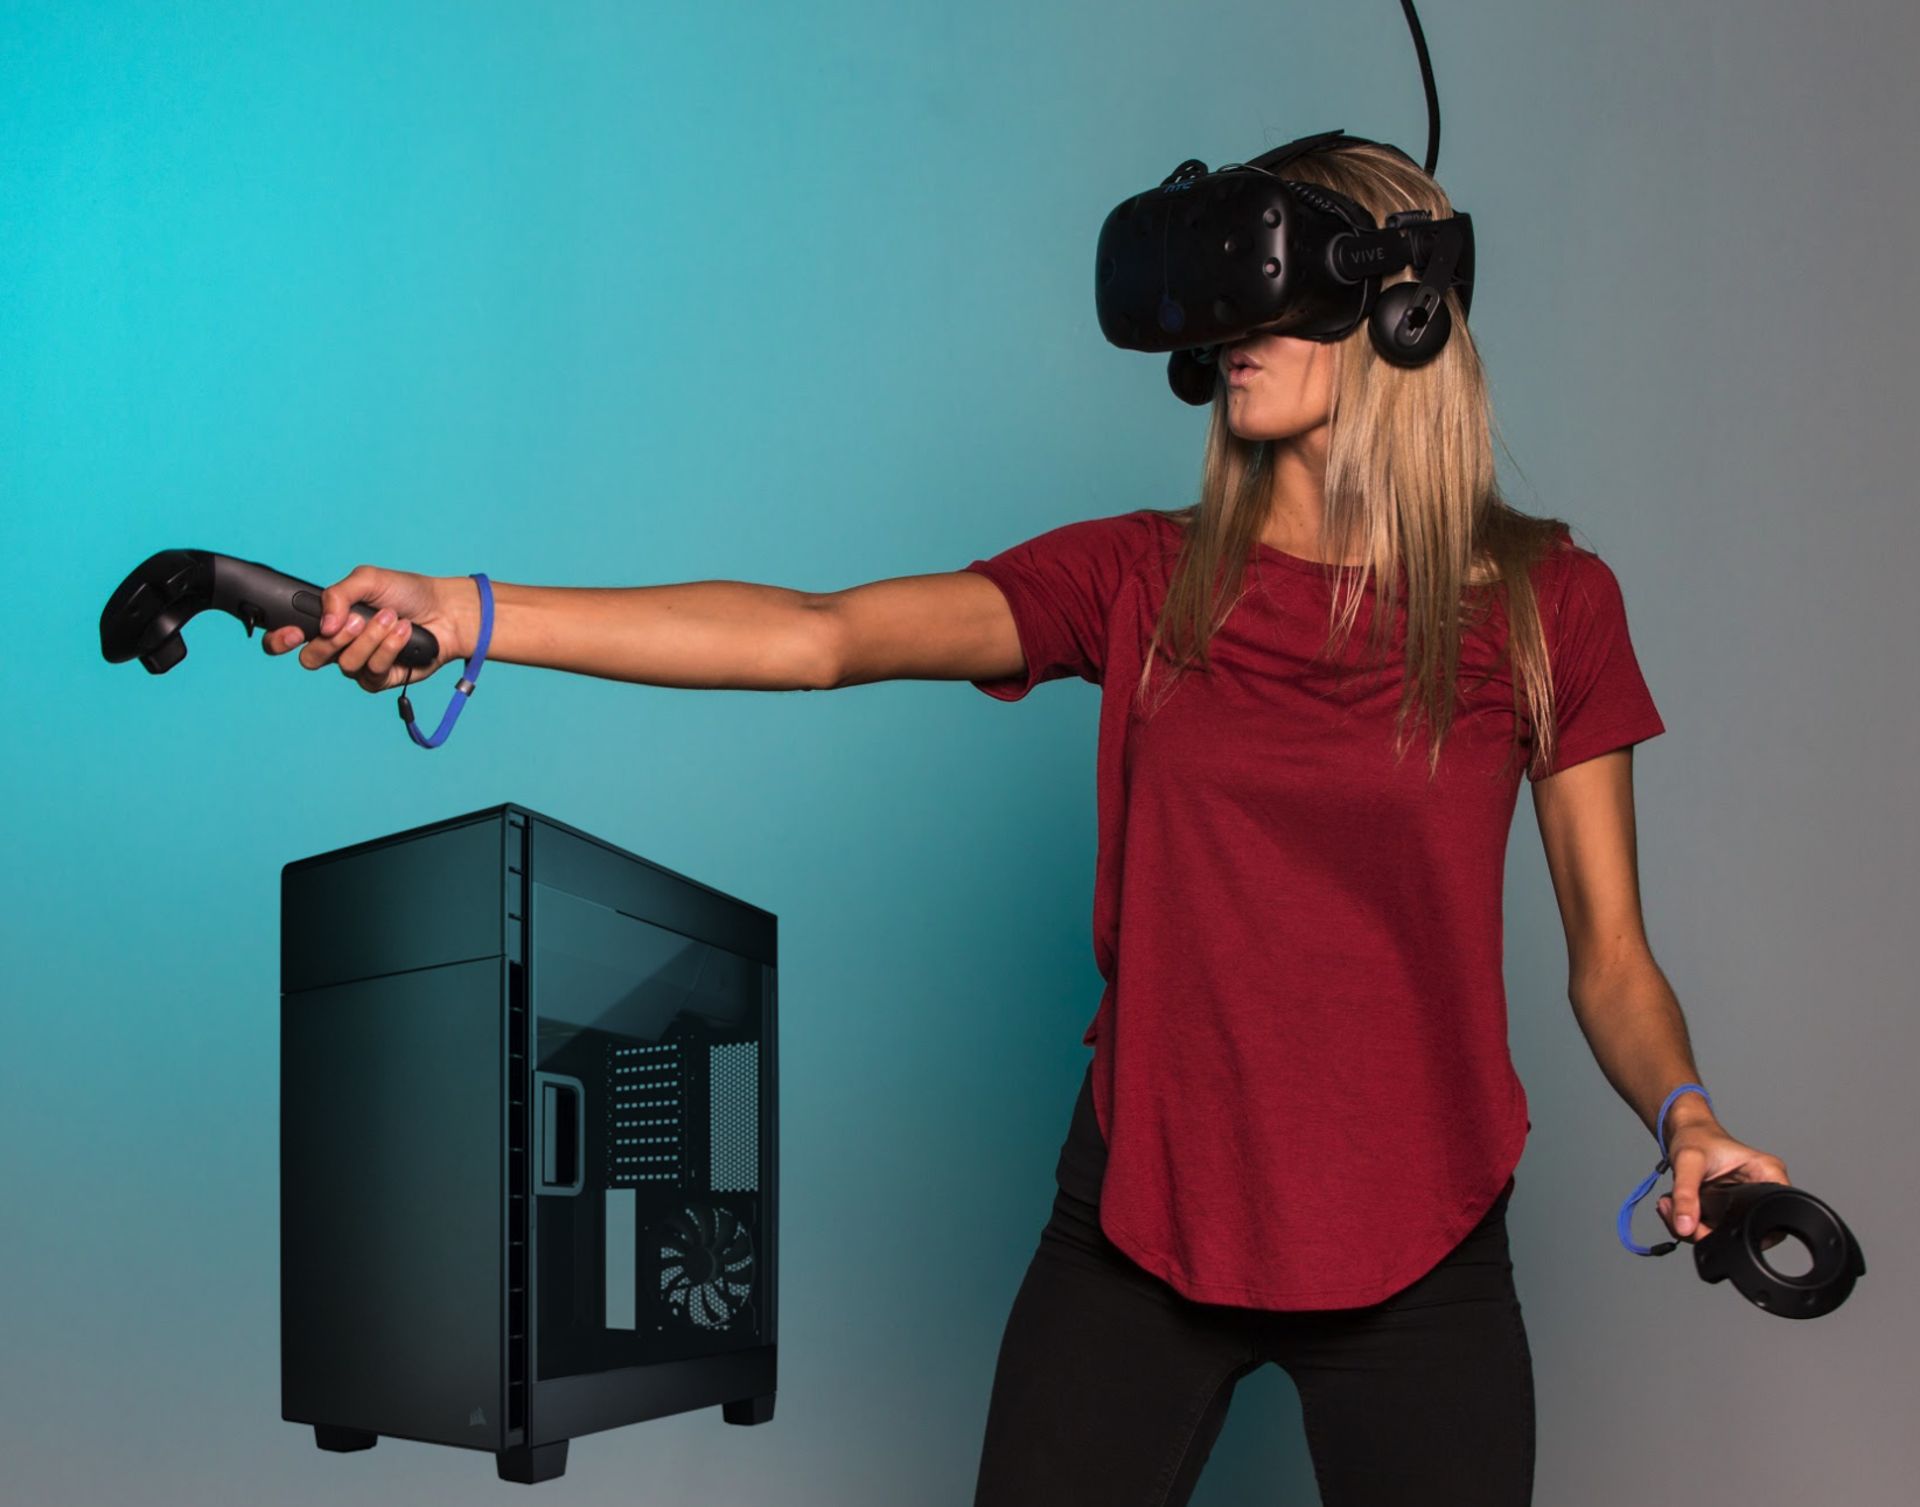 VIRTUAL REALITY EQUIPMENT - H-98" D-125" W- 122" GAMING TOWER, VR HEAD SET, SENSORS AND MONITOR